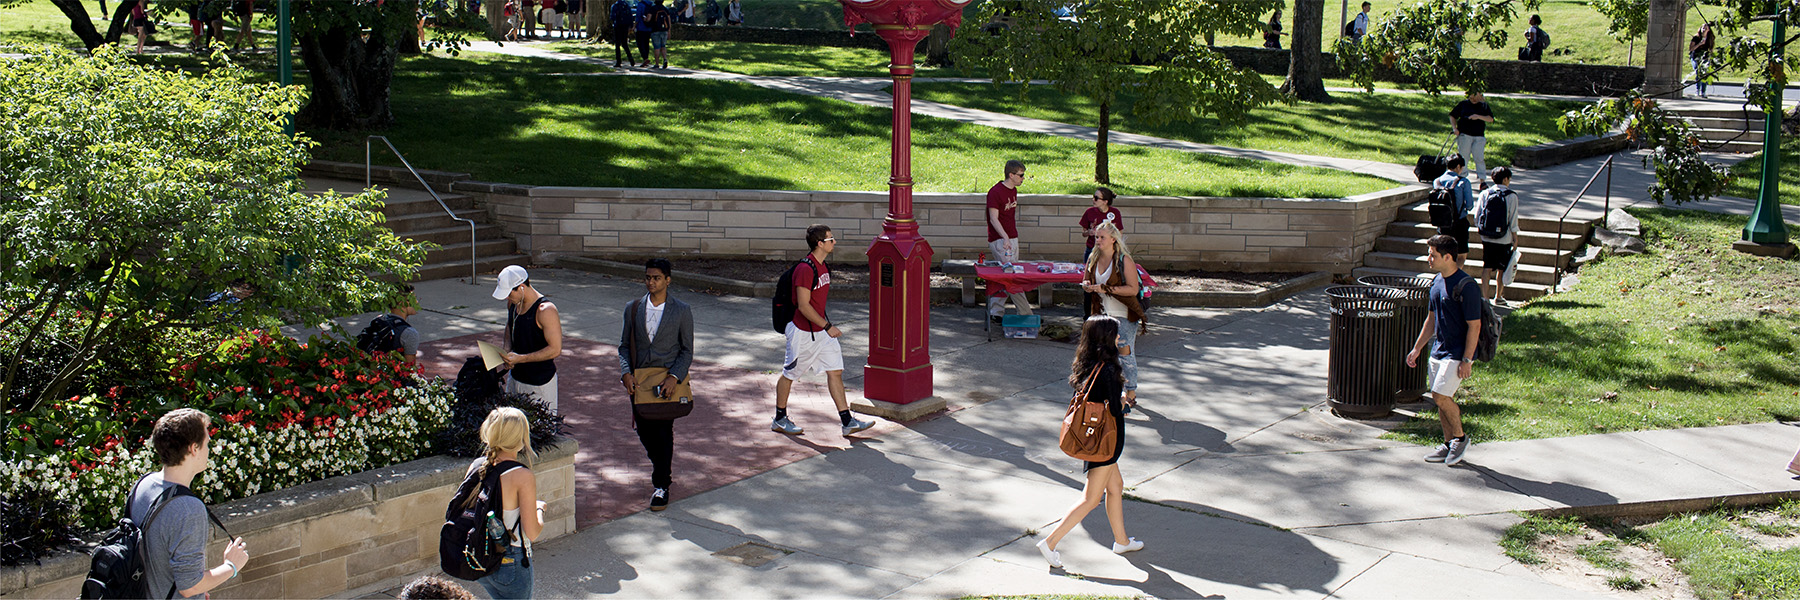 Students walking near a red outdoor clock on the Indiana University Bloomington campus